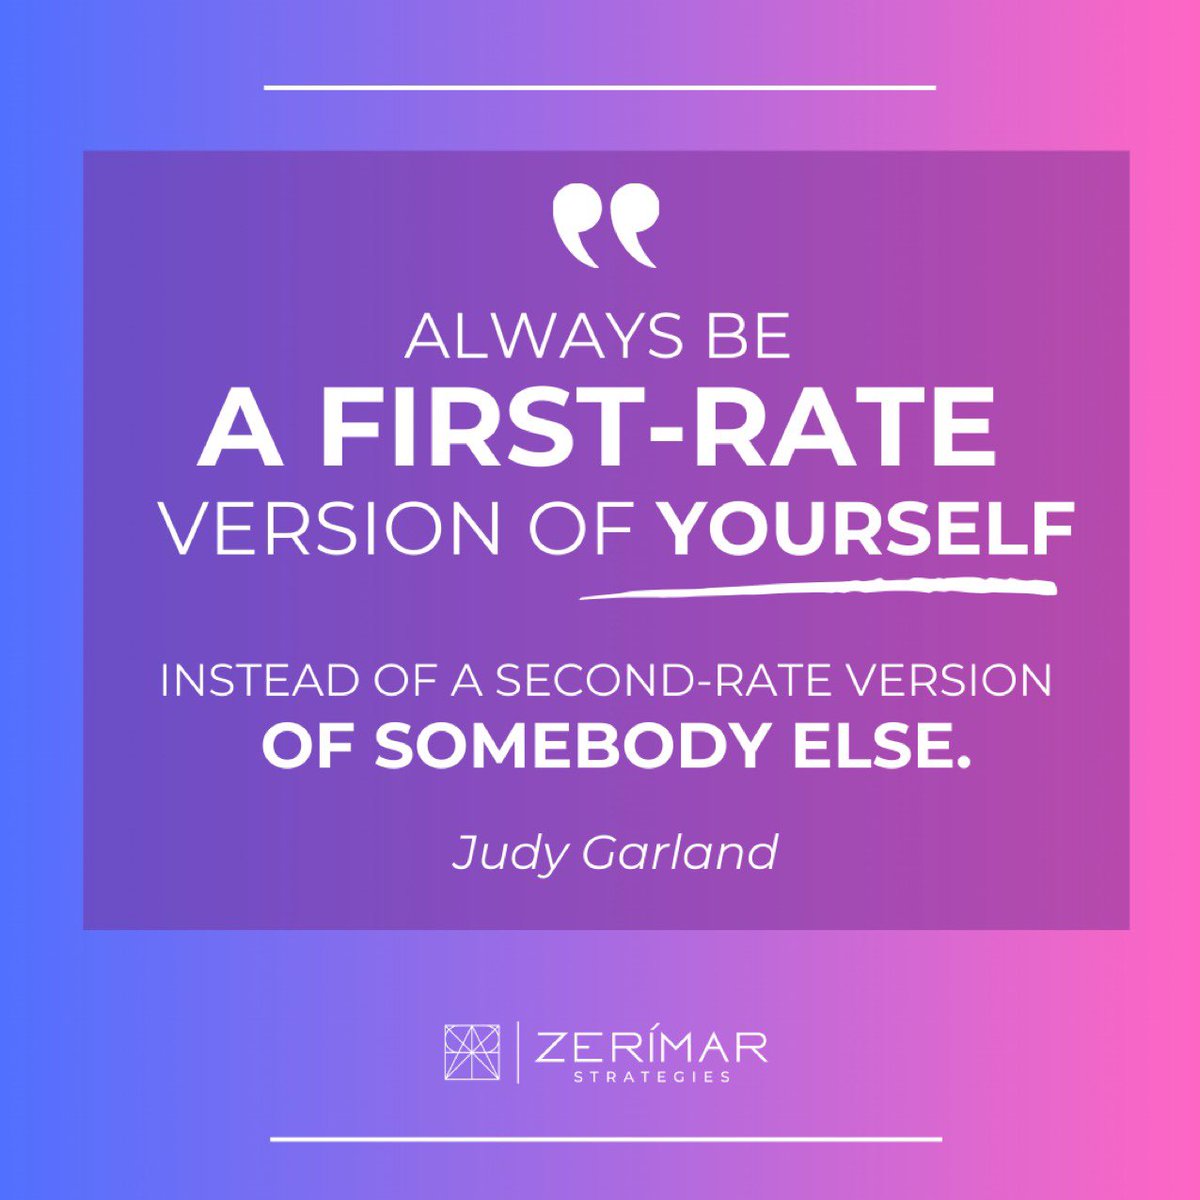 Always be a first-rate version of yourself! 🙌🏼 #WomanHistoryMonth

#womenempowerment #womensupportingwomen #womanpower #womenempoweringwomen #womanquotes #girlpower #womanquotes